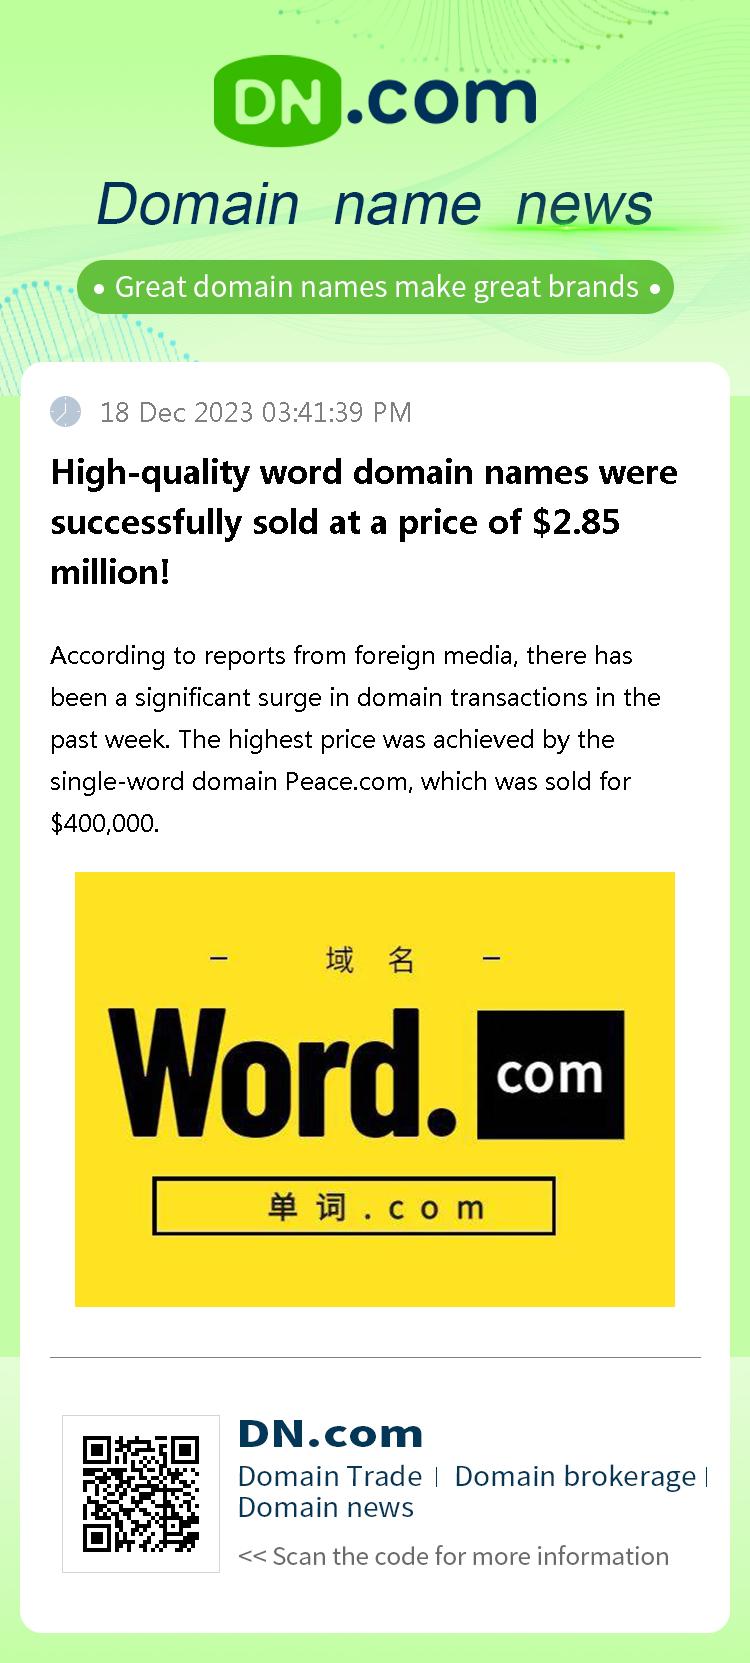 High-quality word domain names were successfully sold at a price of $2.85 million!